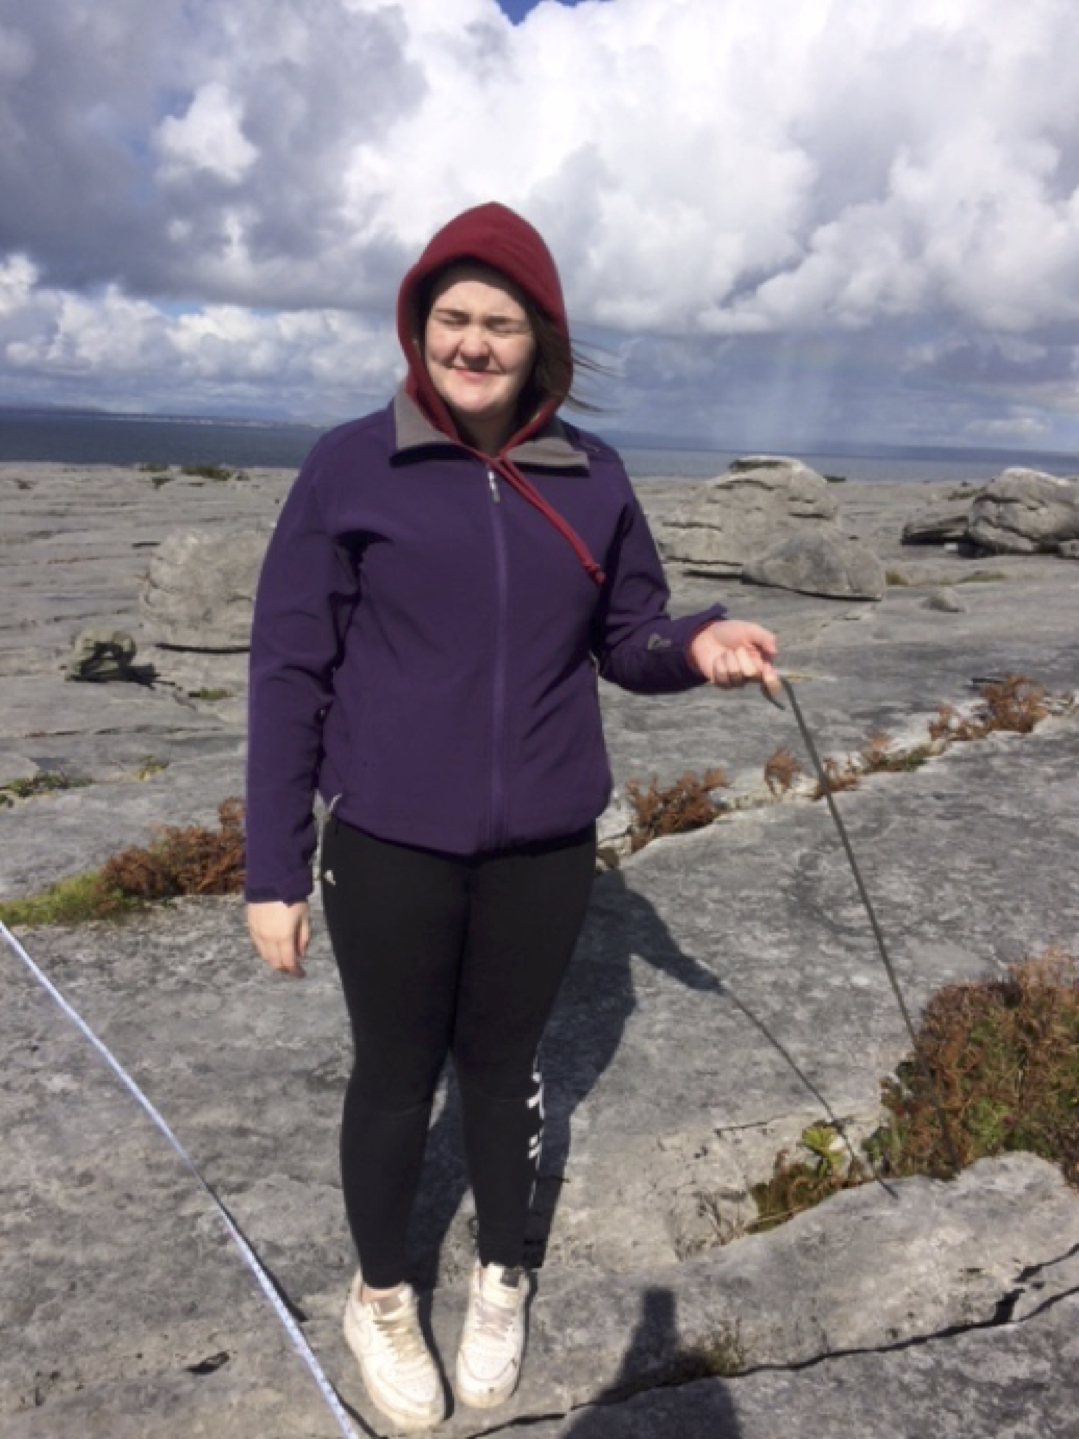 Sept 2017: Leaving Certificate Student from Desmond College Newcastle West enjoying their Trip to the Burren